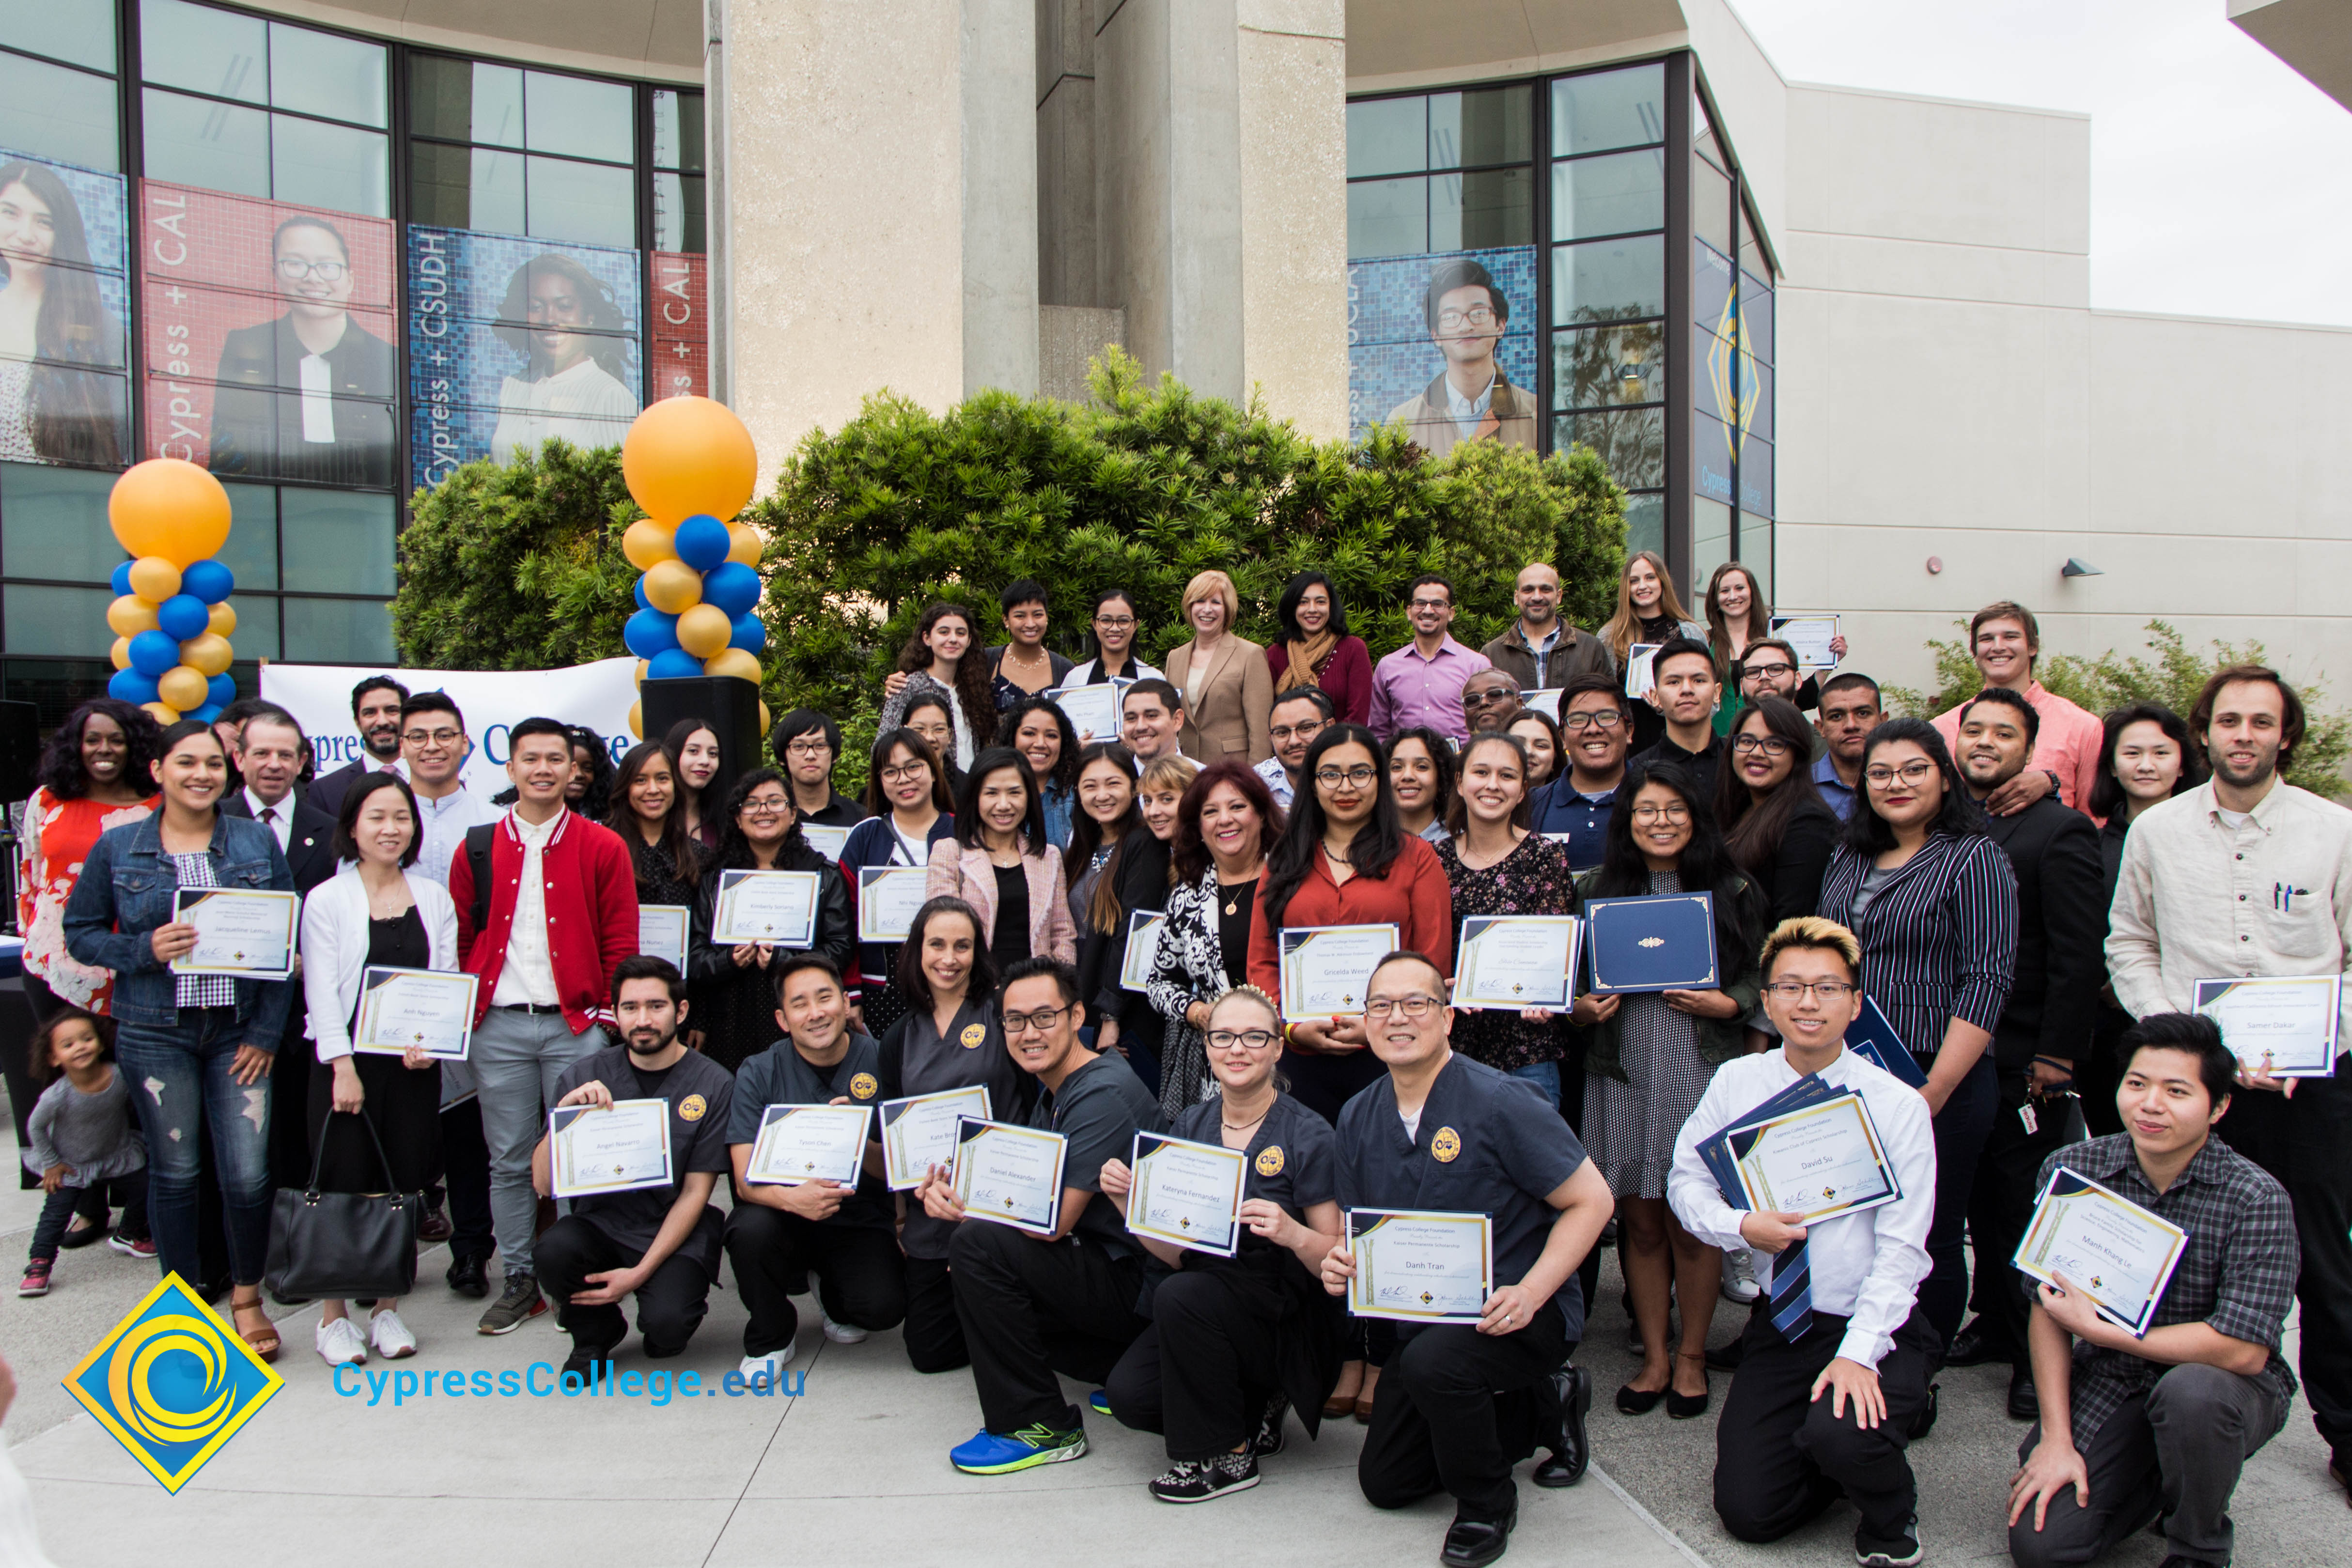 Apply for the Foreign Language Scholarship at Cypress College